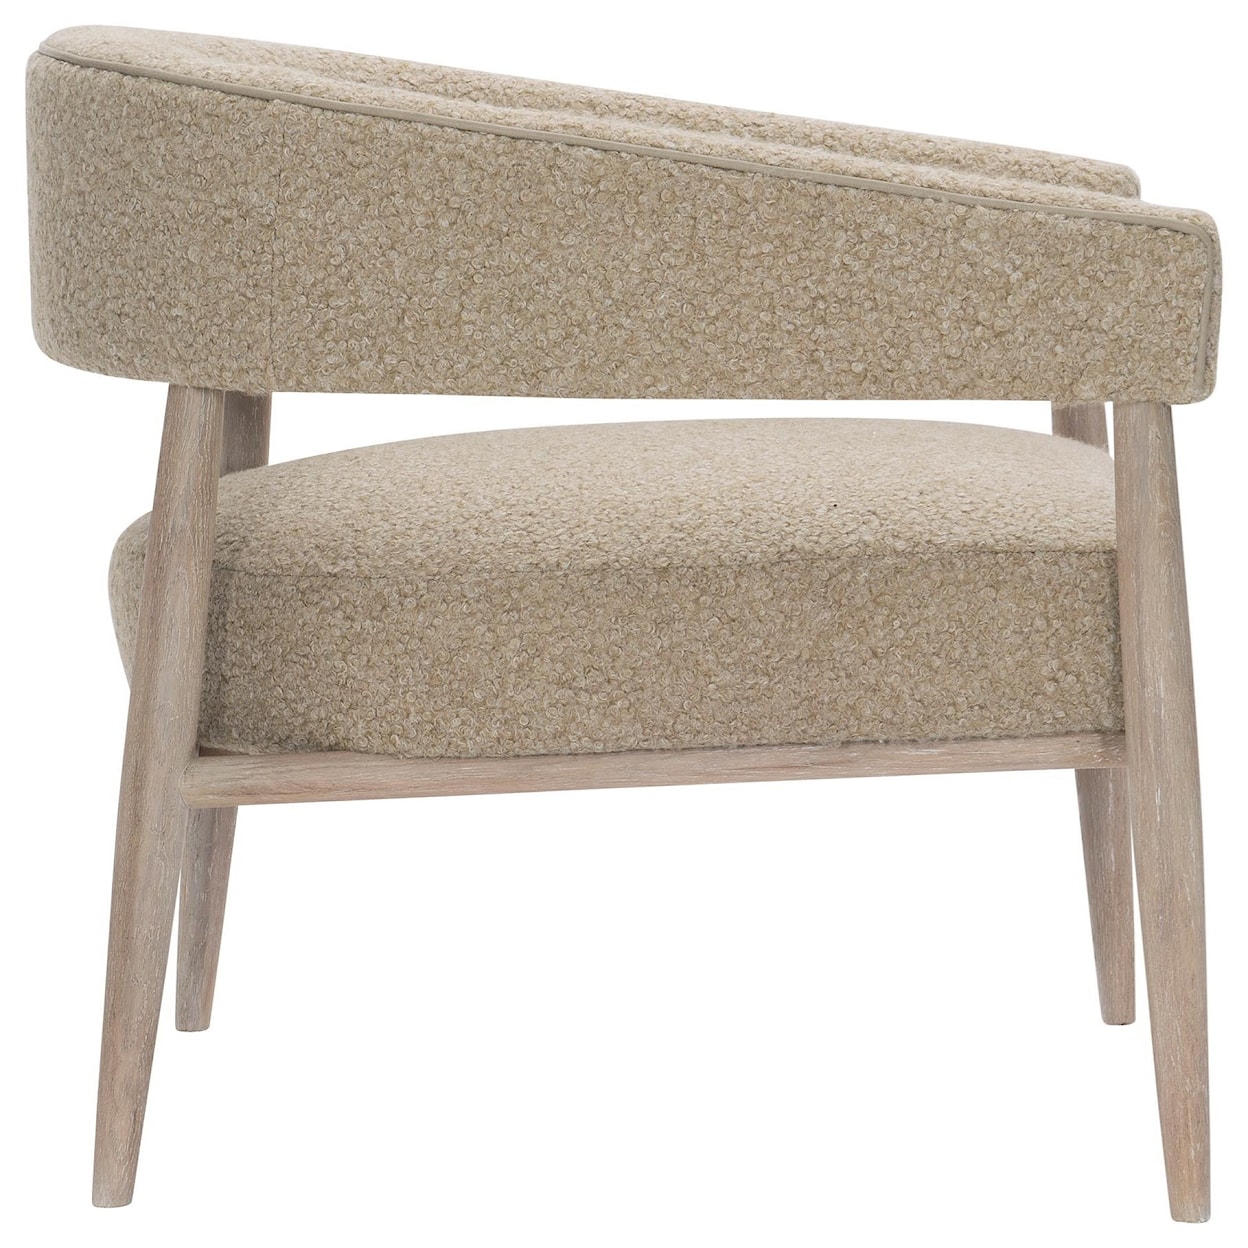 Bernhardt Upholstery - Maddox Accent Chair